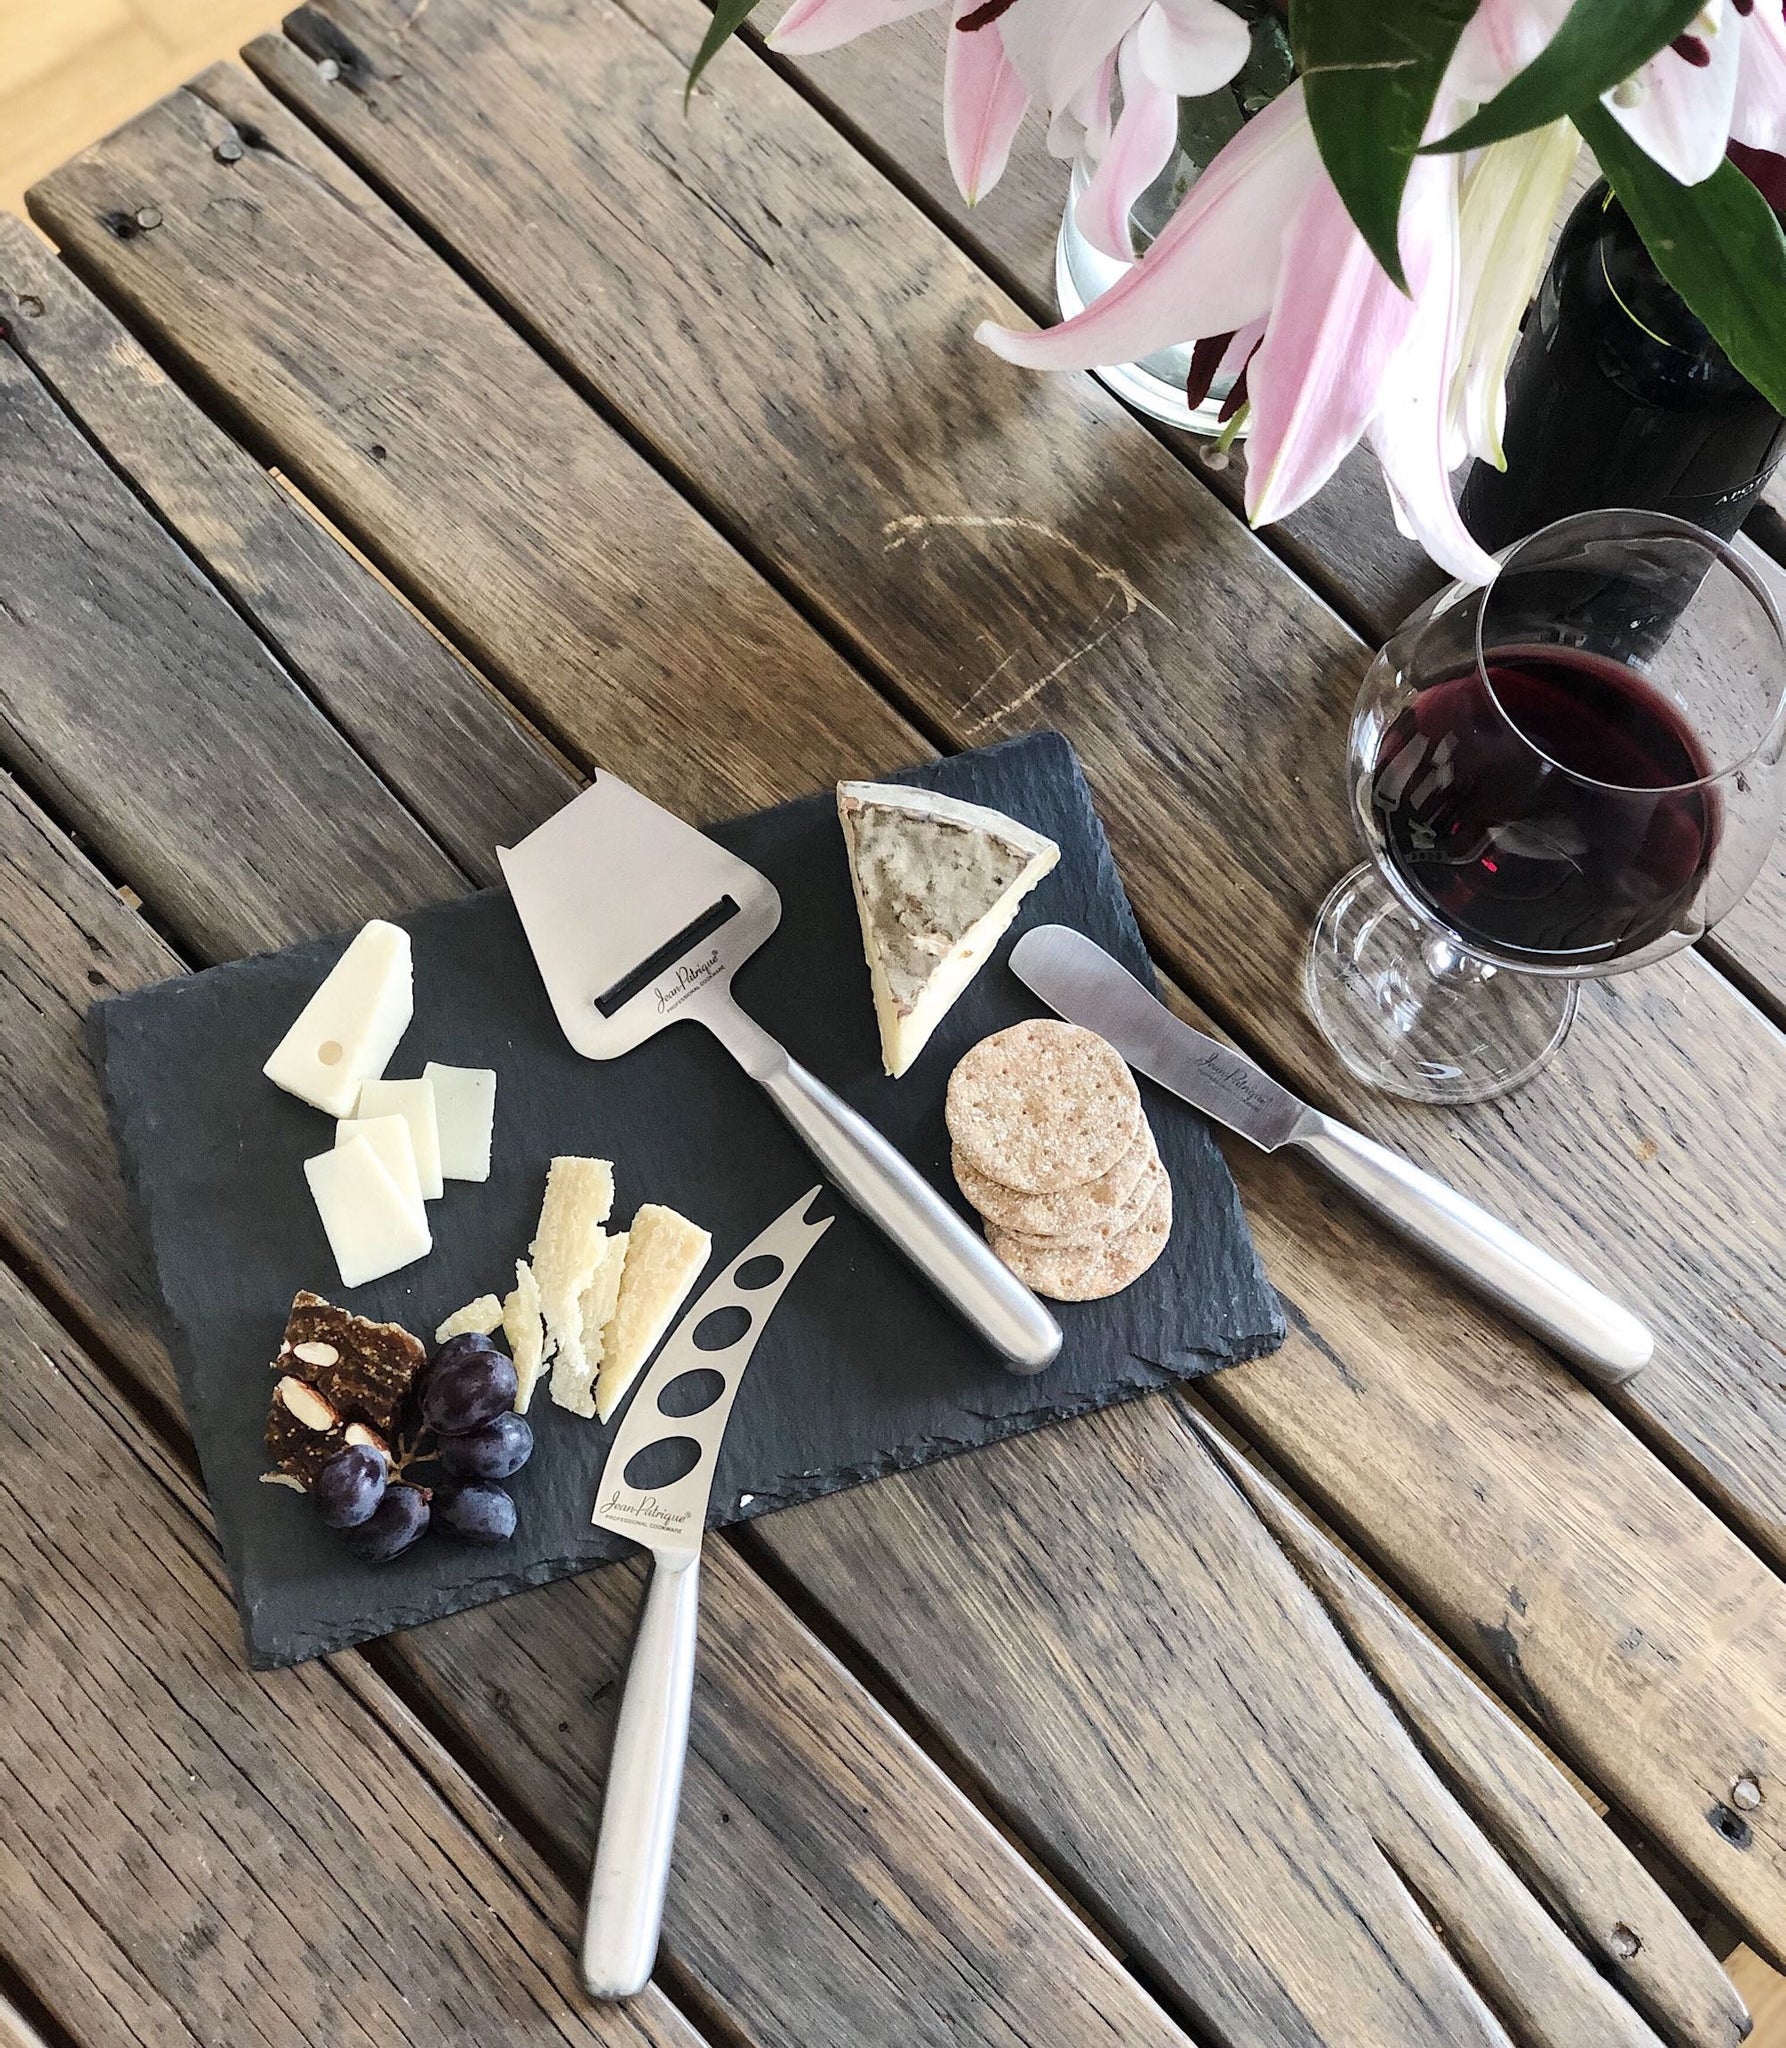 Jean-Patrique Tuscany Slate Serving Board & 3 Piece Cheese Knife Set